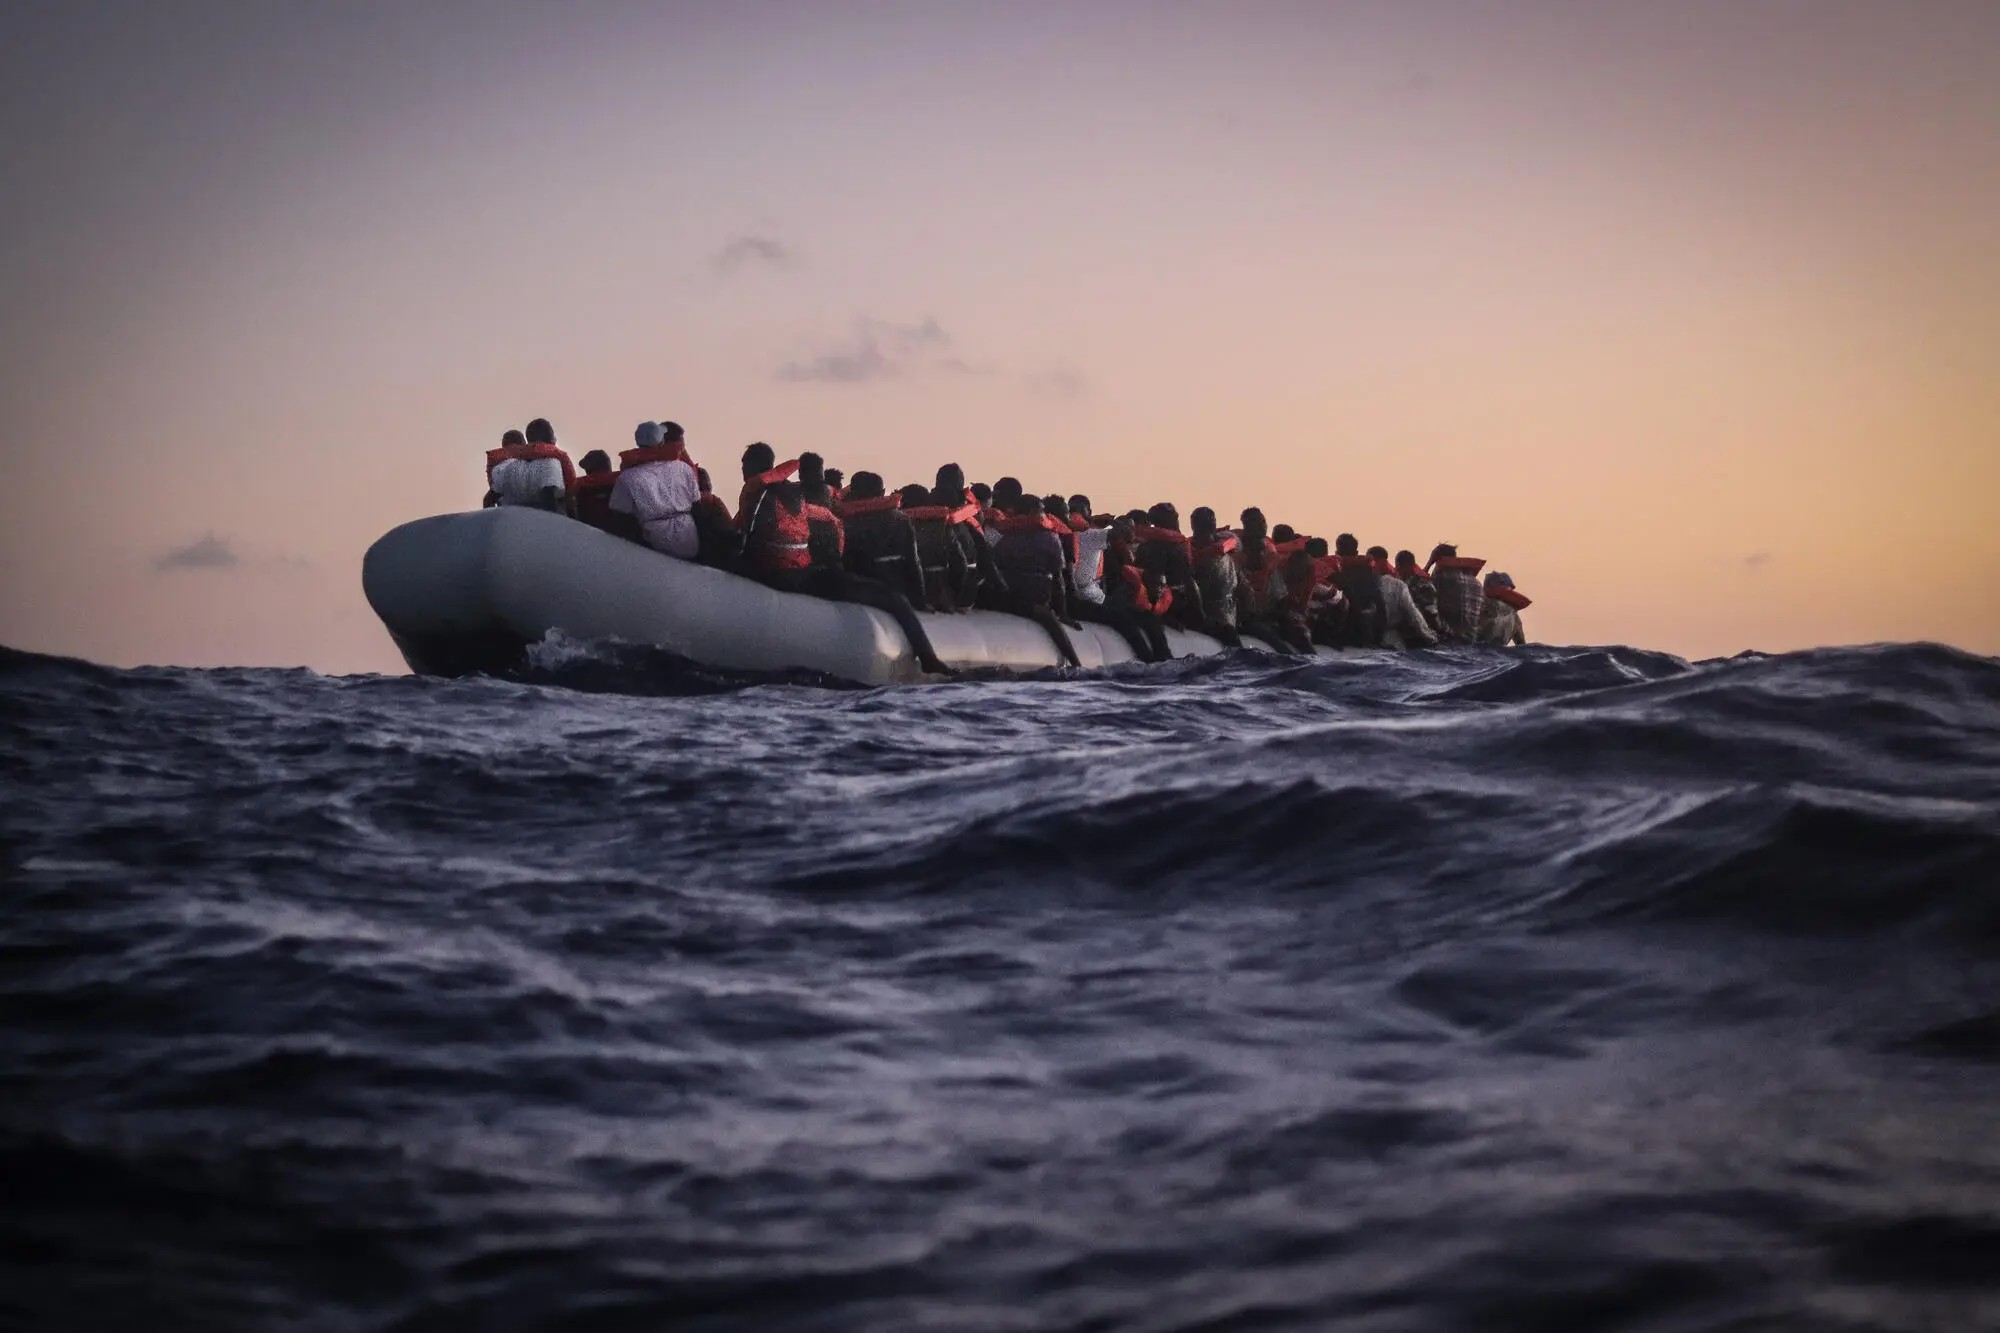 Five things to know about the Mediterranean search and rescue crisis